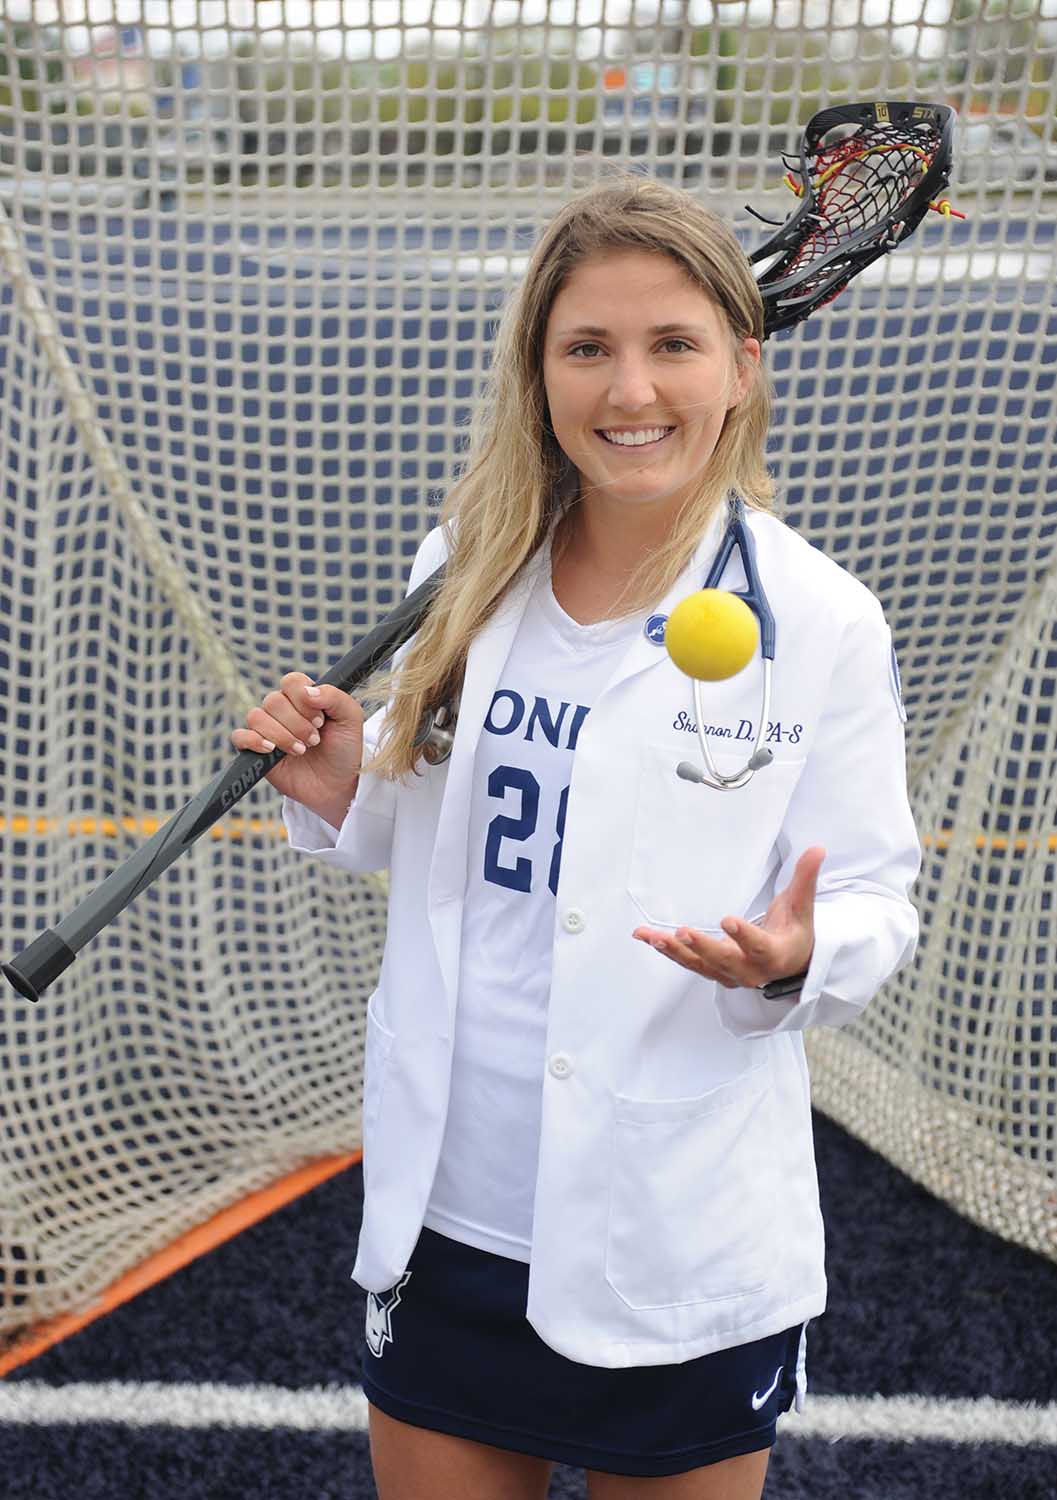 Shannon Doyle PA '22 poses in front of a Lacrosse goal in her PA white jacket